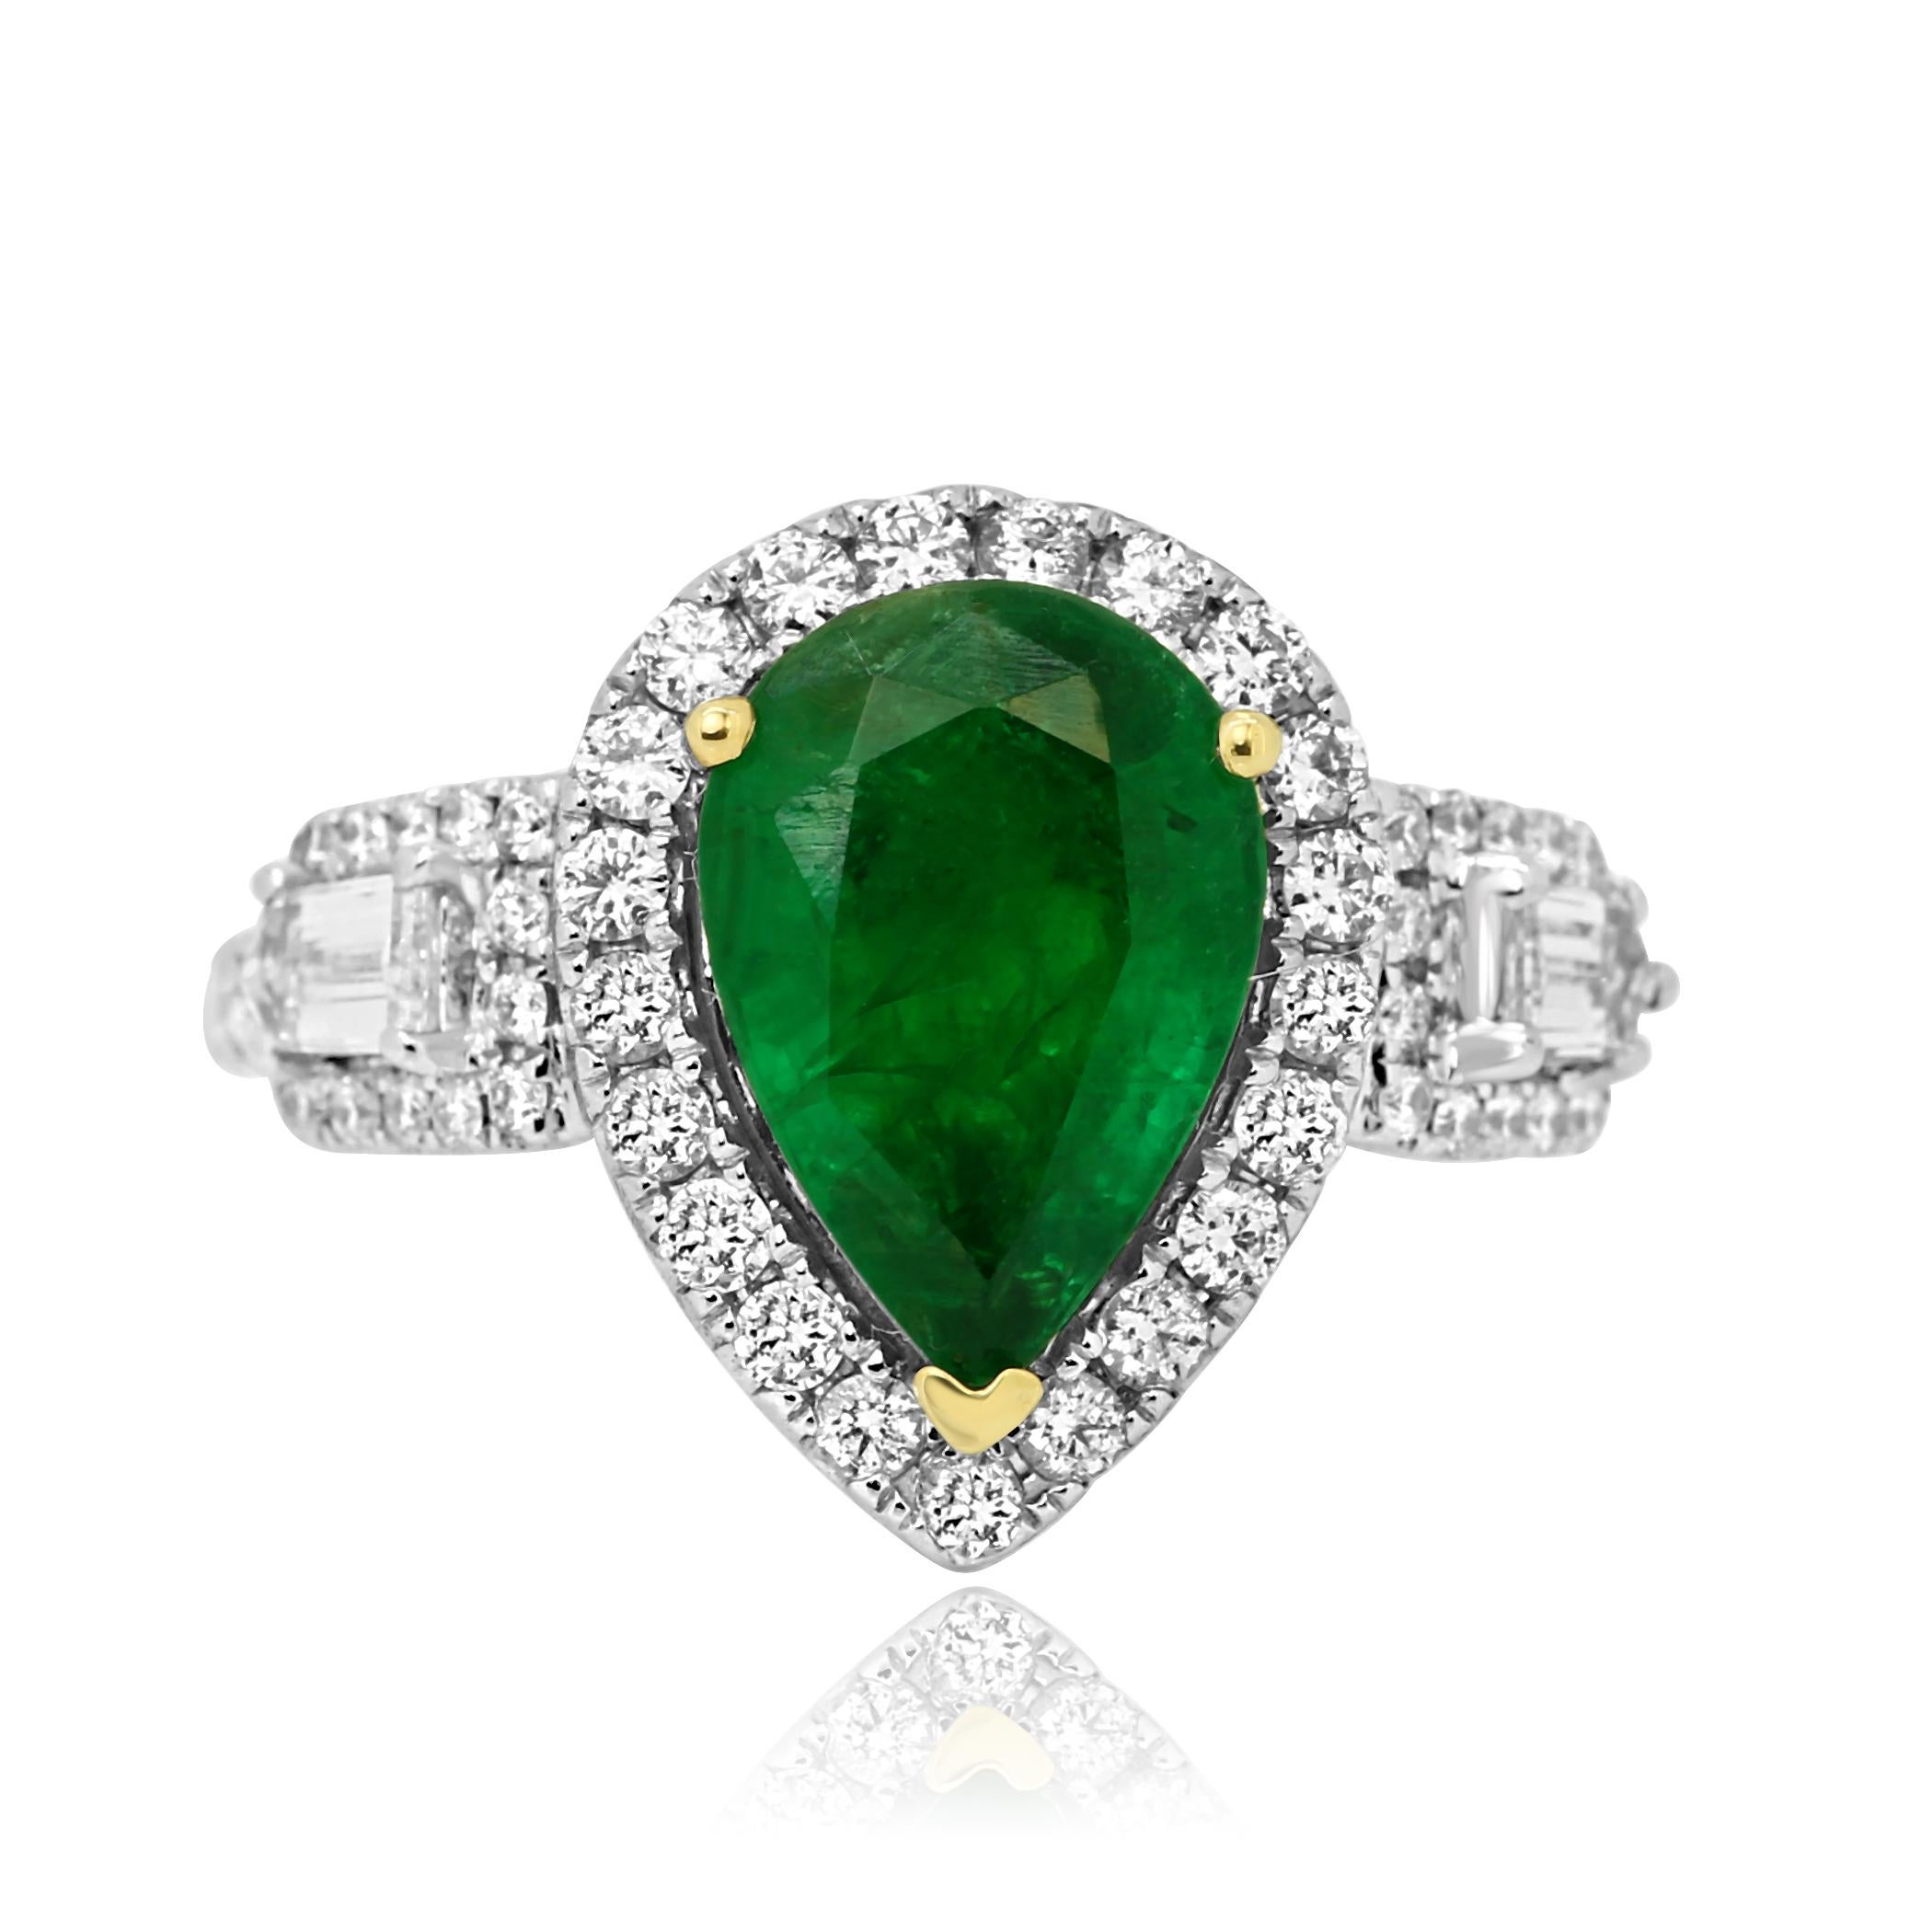 Gorgeous Emerald Pear 2.78 Carat Flanked With 2 Colorless VS-SI Diamond Bullet Shape 0.24 Carat Encircled in Single Halo of Colorless VS-SI Diamond Rounds 0.74 Carat Stunning 14K White and Yellow Gold Three Stone Bridal Fashion Ring.
TOTAL WEIGHT